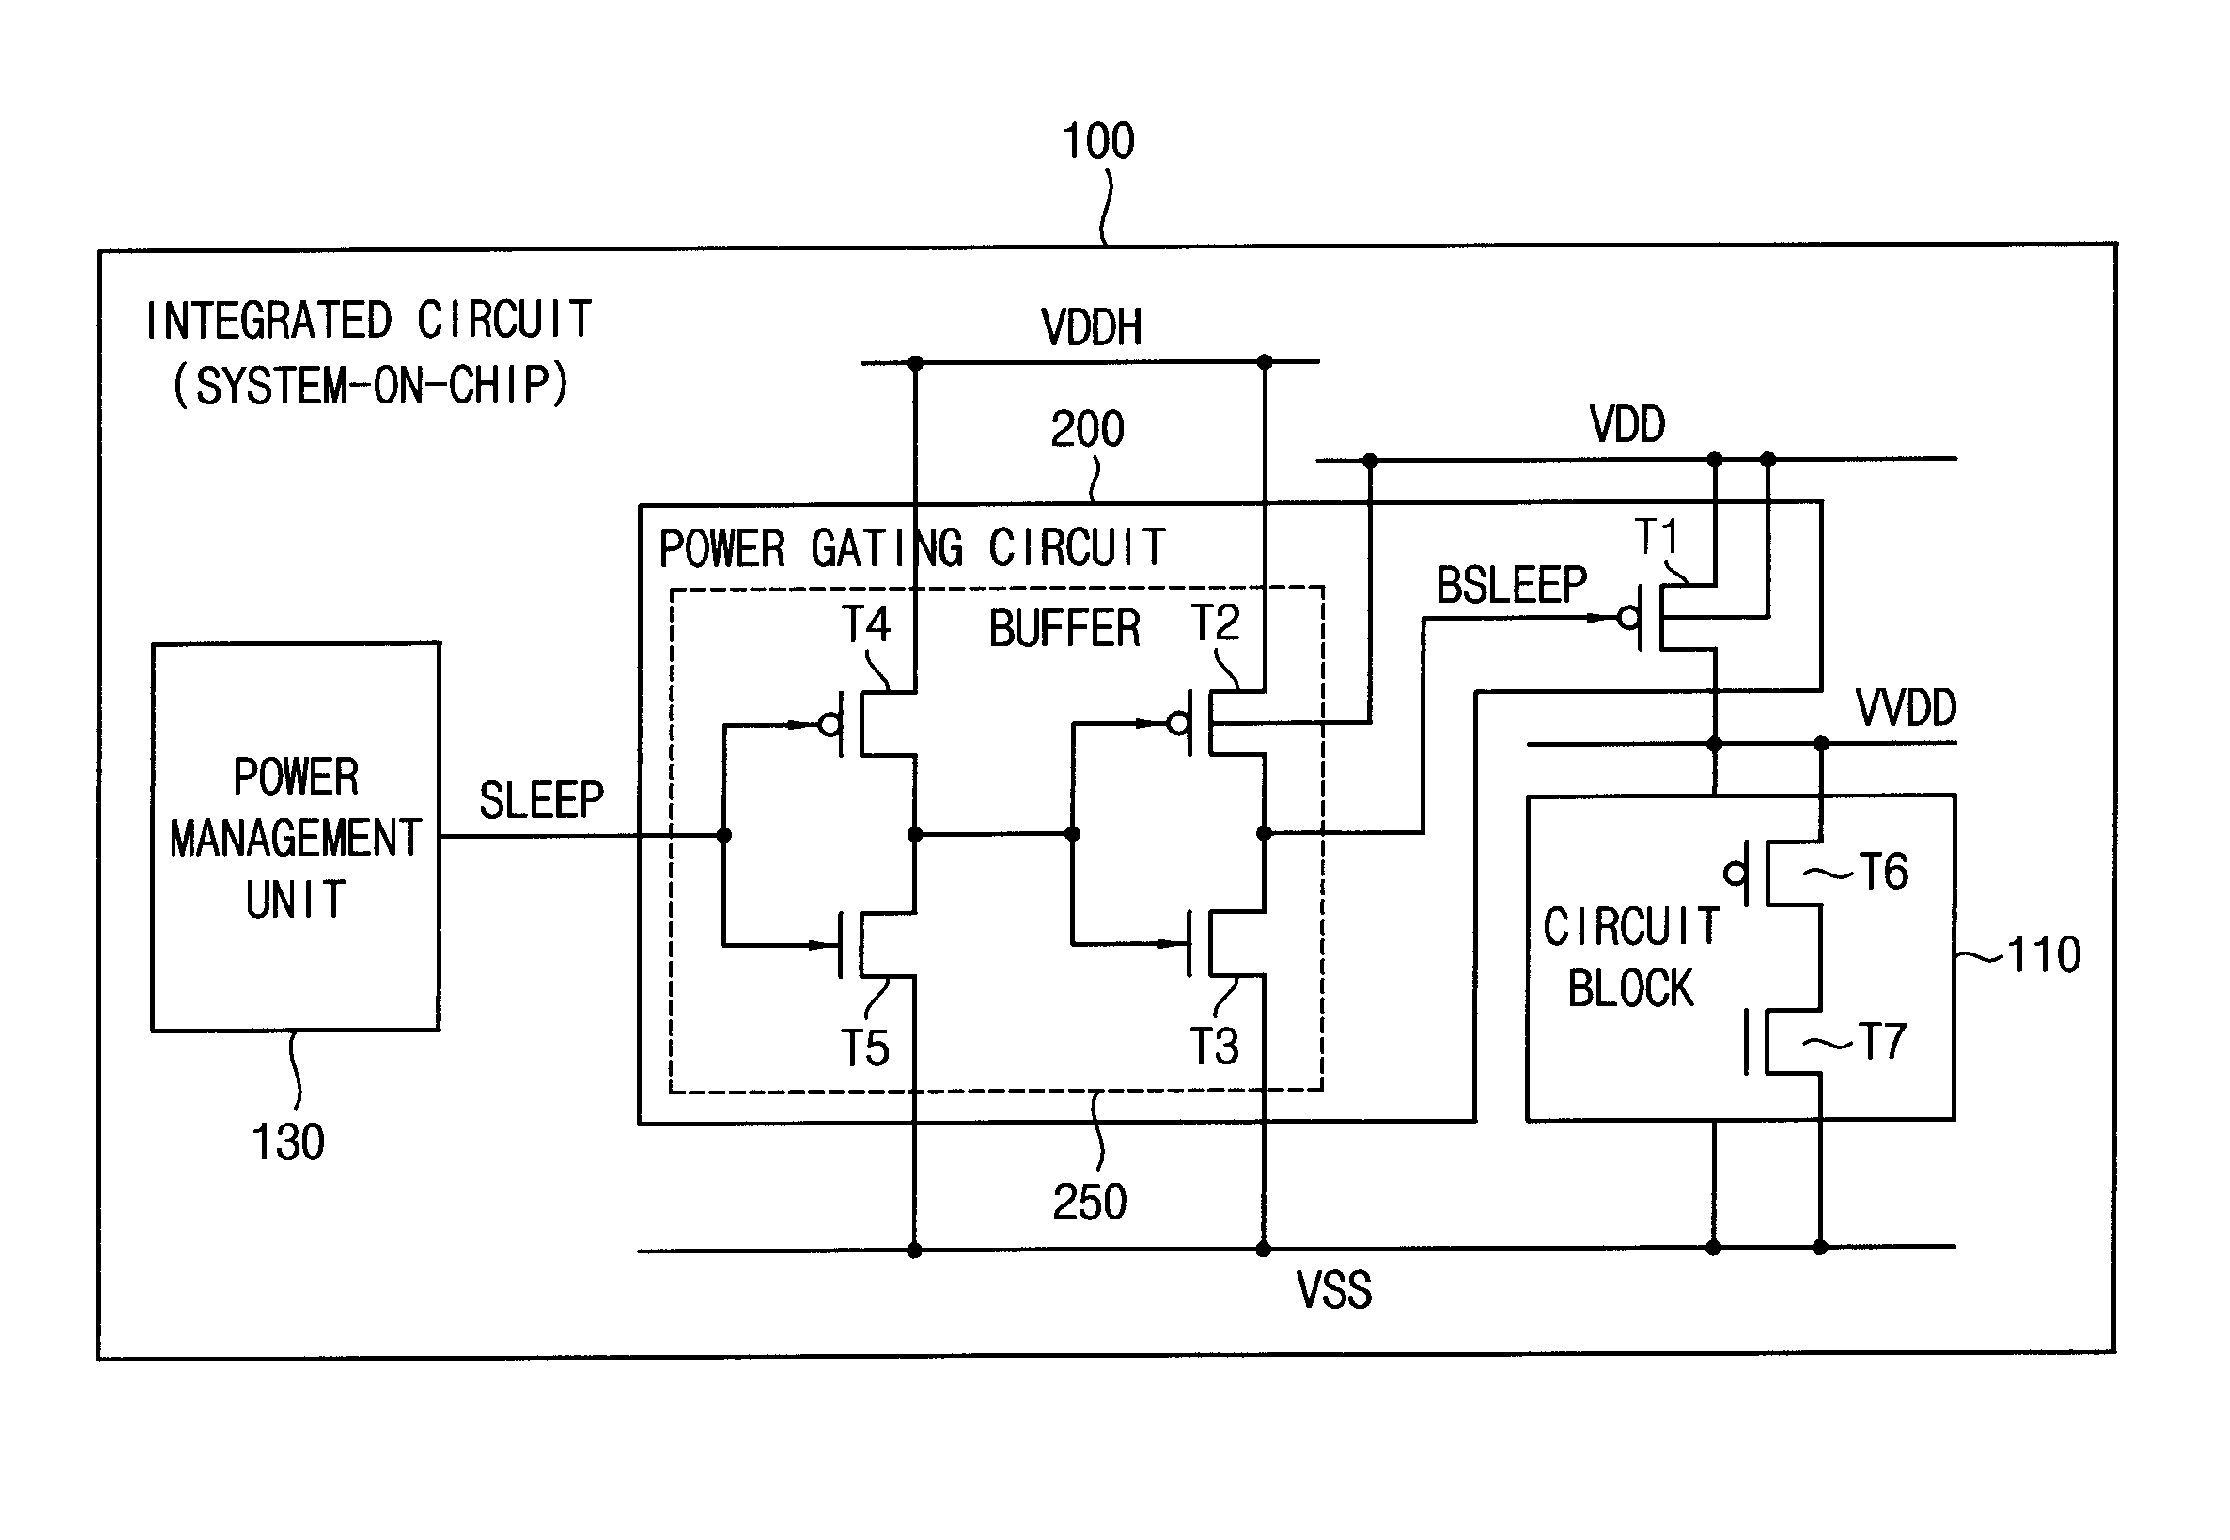 Power gating circuit and integrated circuit